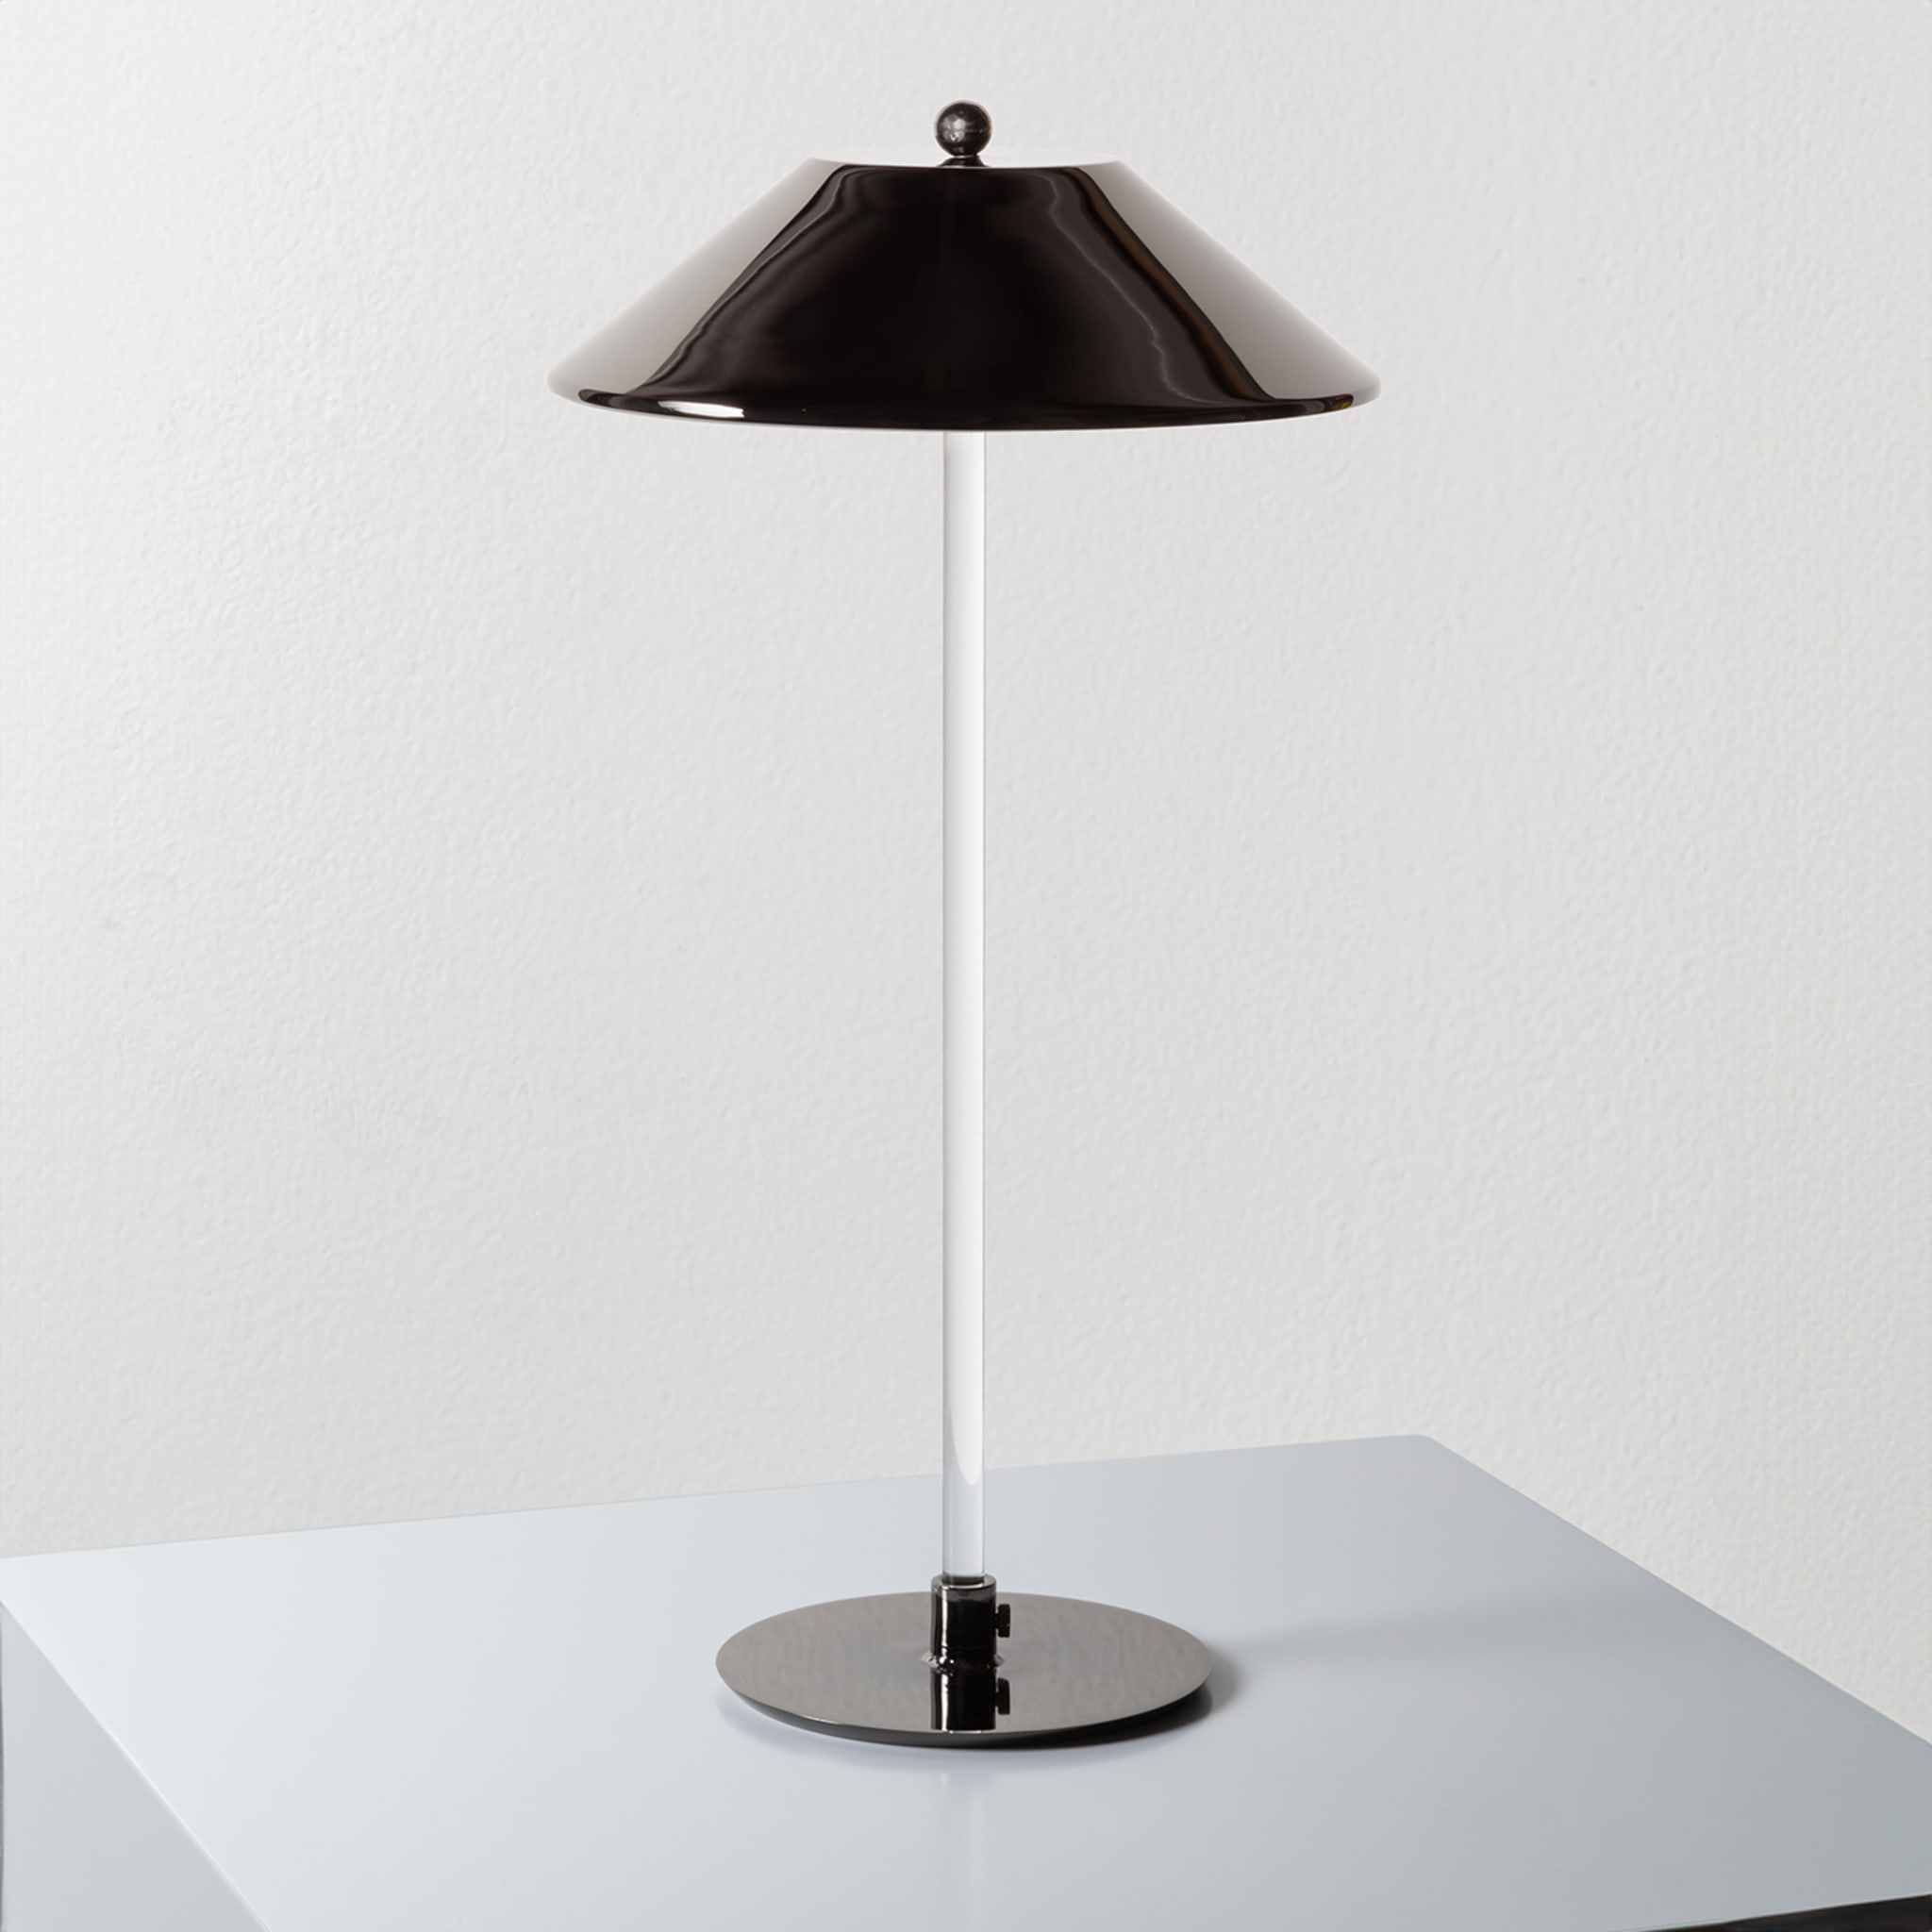 Candilee Polished Black Table Lamp by Isacco Brioschi - Alternative view 1